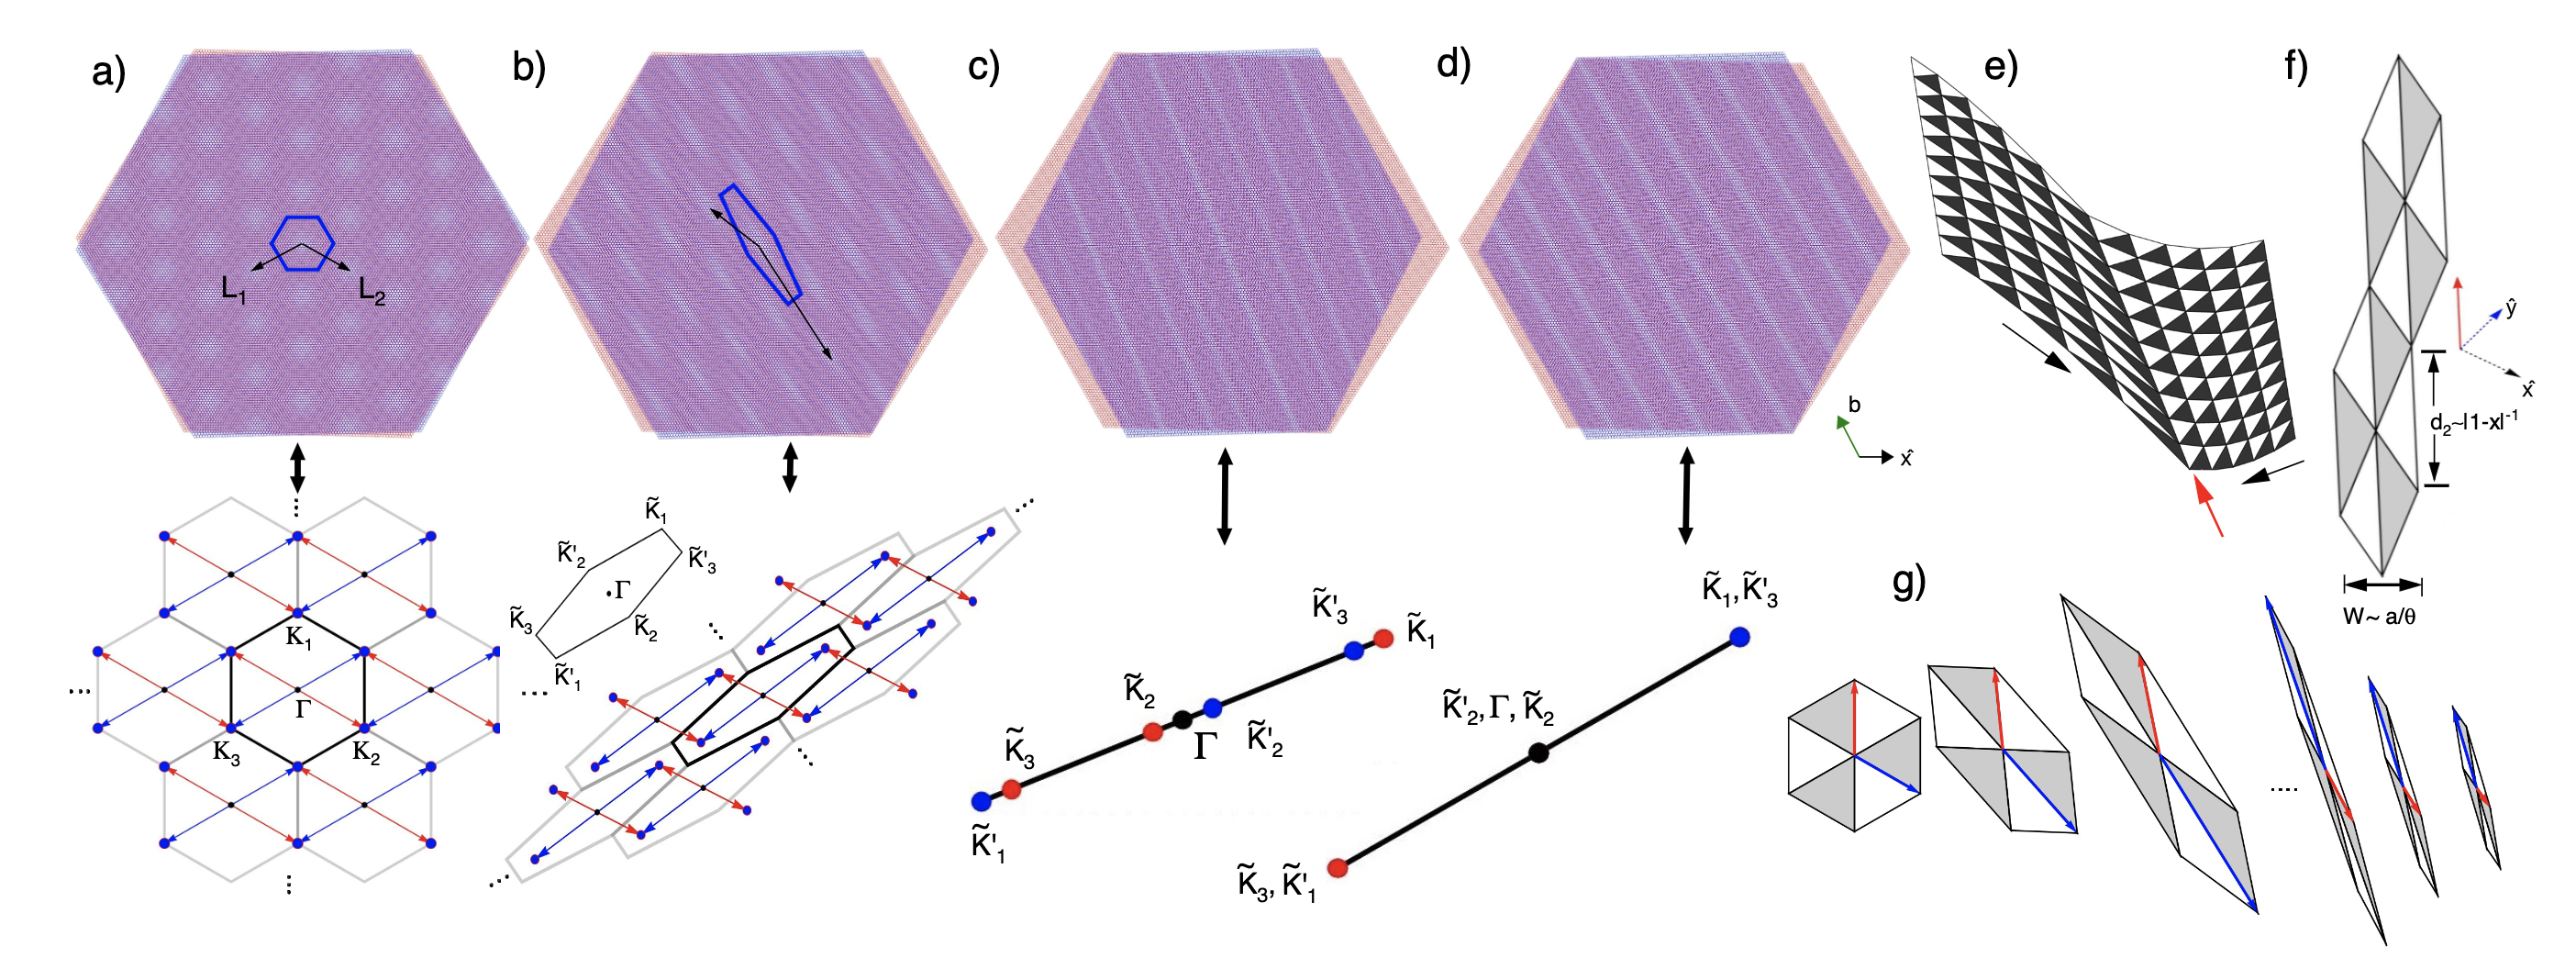 Strain induced quasi-unidimensional channels in twisted moiré lattices